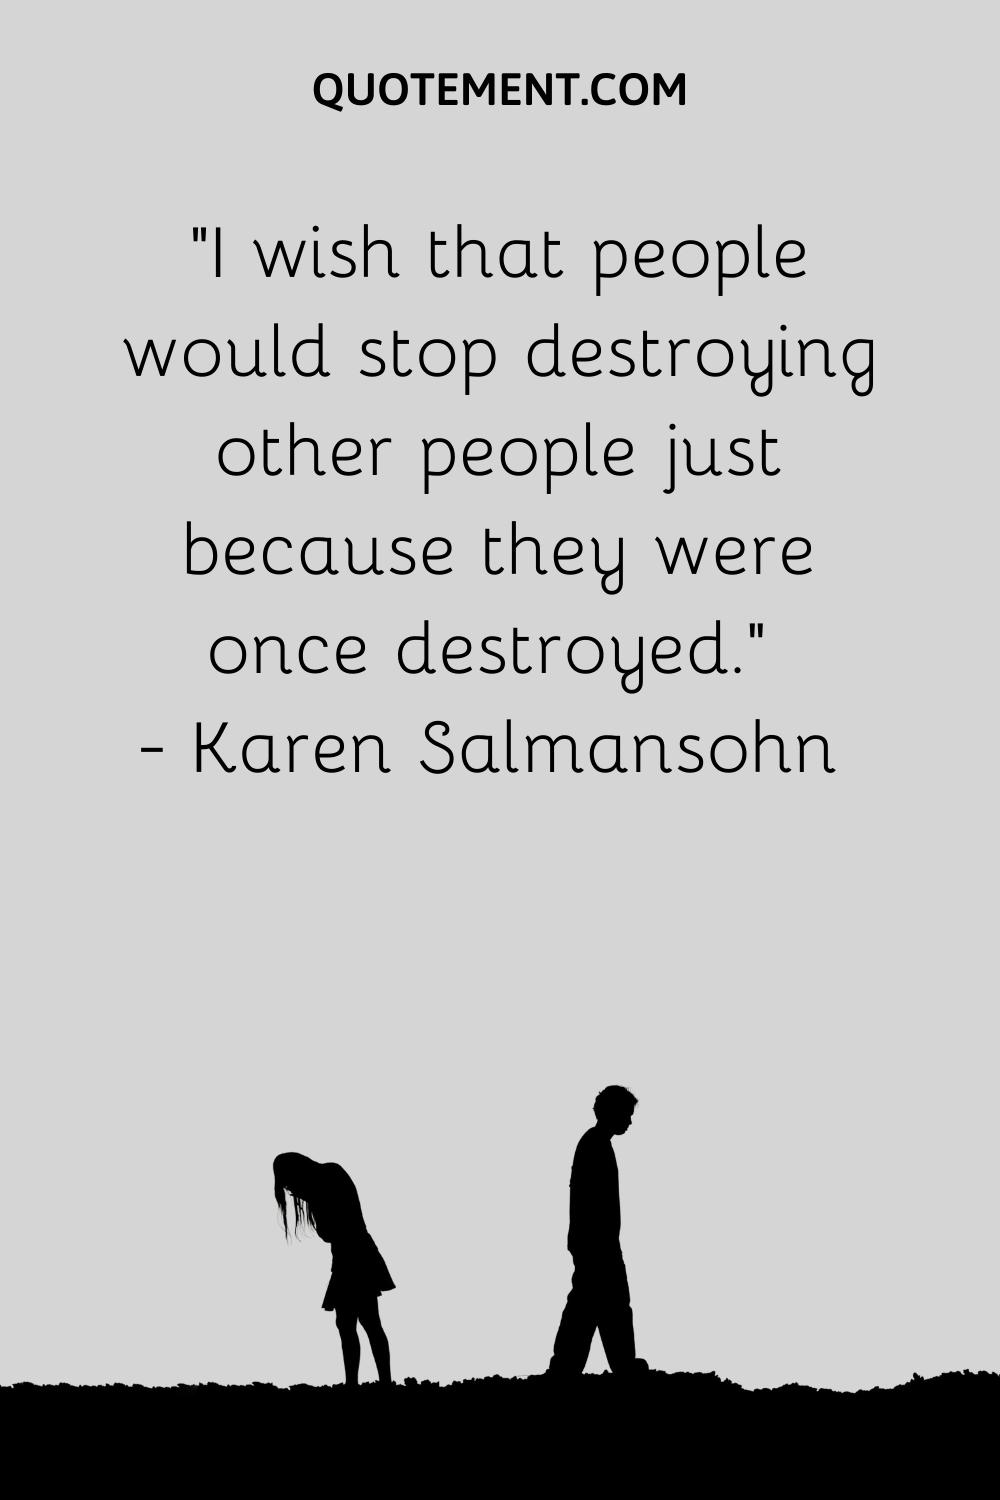 I wish that people would stop destroying other people just because they were once destroyed